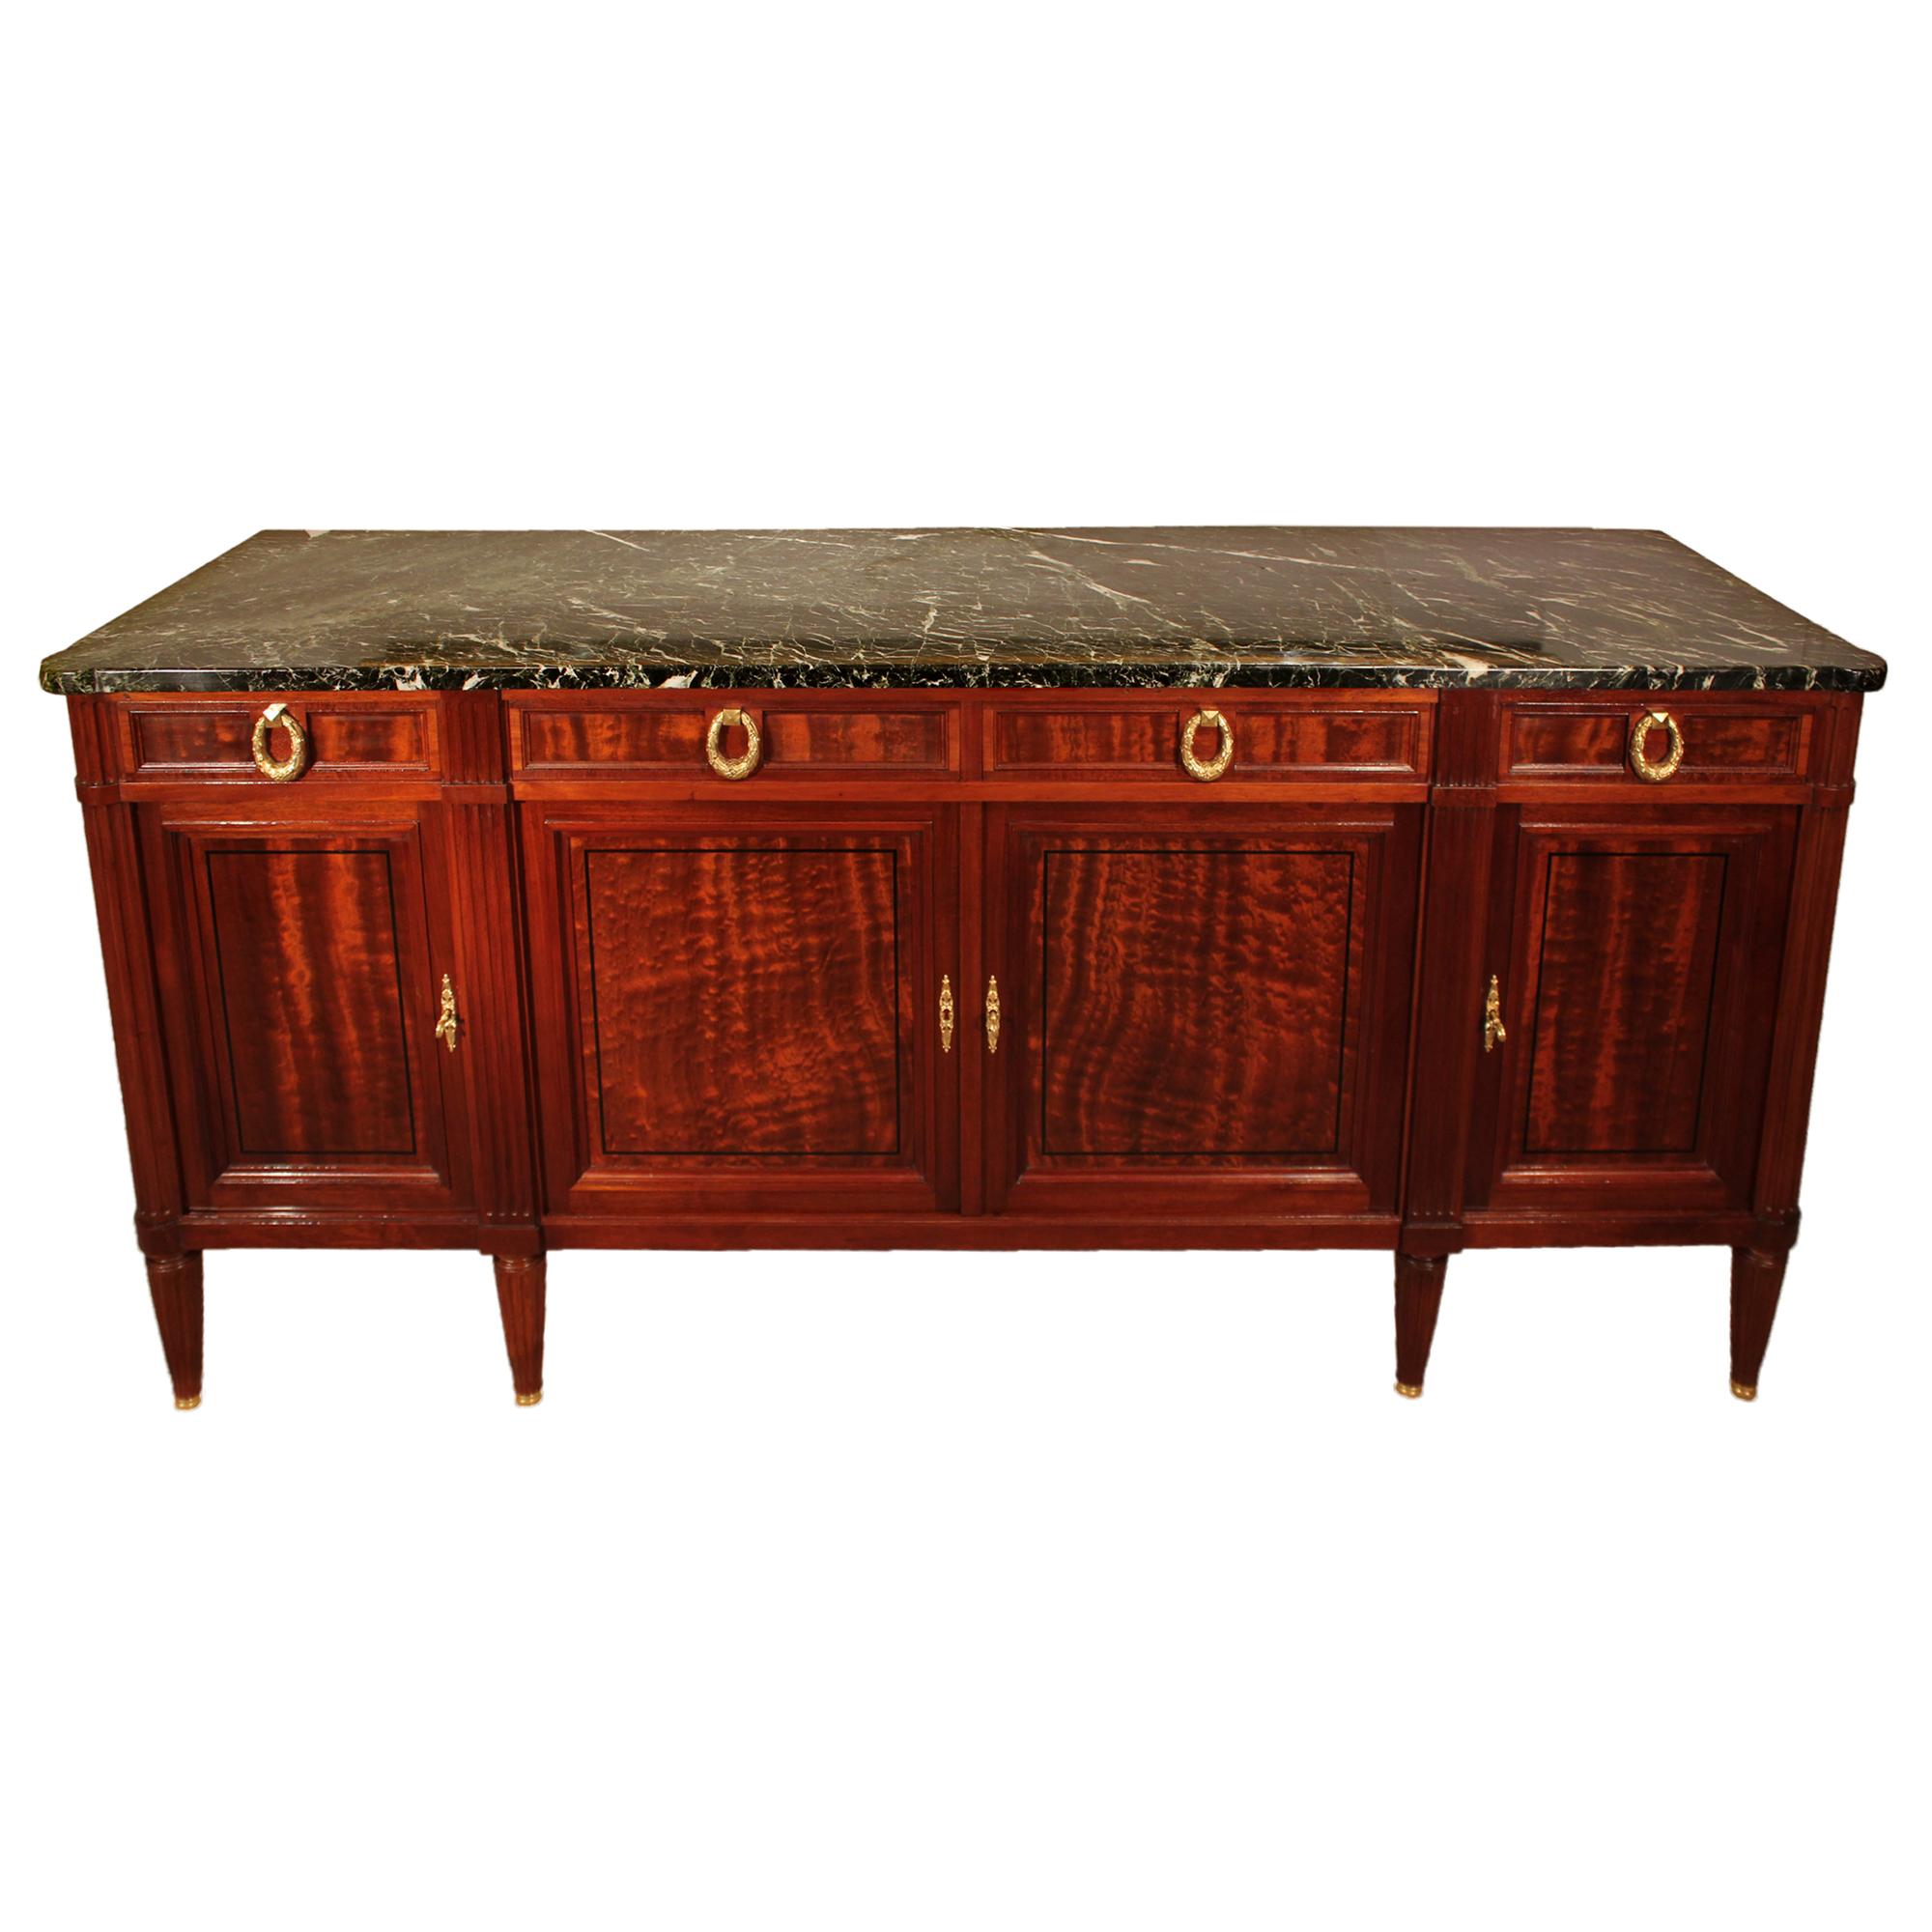 A fine quality French 19th century Louis XVI style mahogany and ebony buffet. The buffet is raised by circular fluted tapered legs ending with ormolu sabots. Above the straight frieze are four paneled doors with inlaid ebony trim and mottled border,